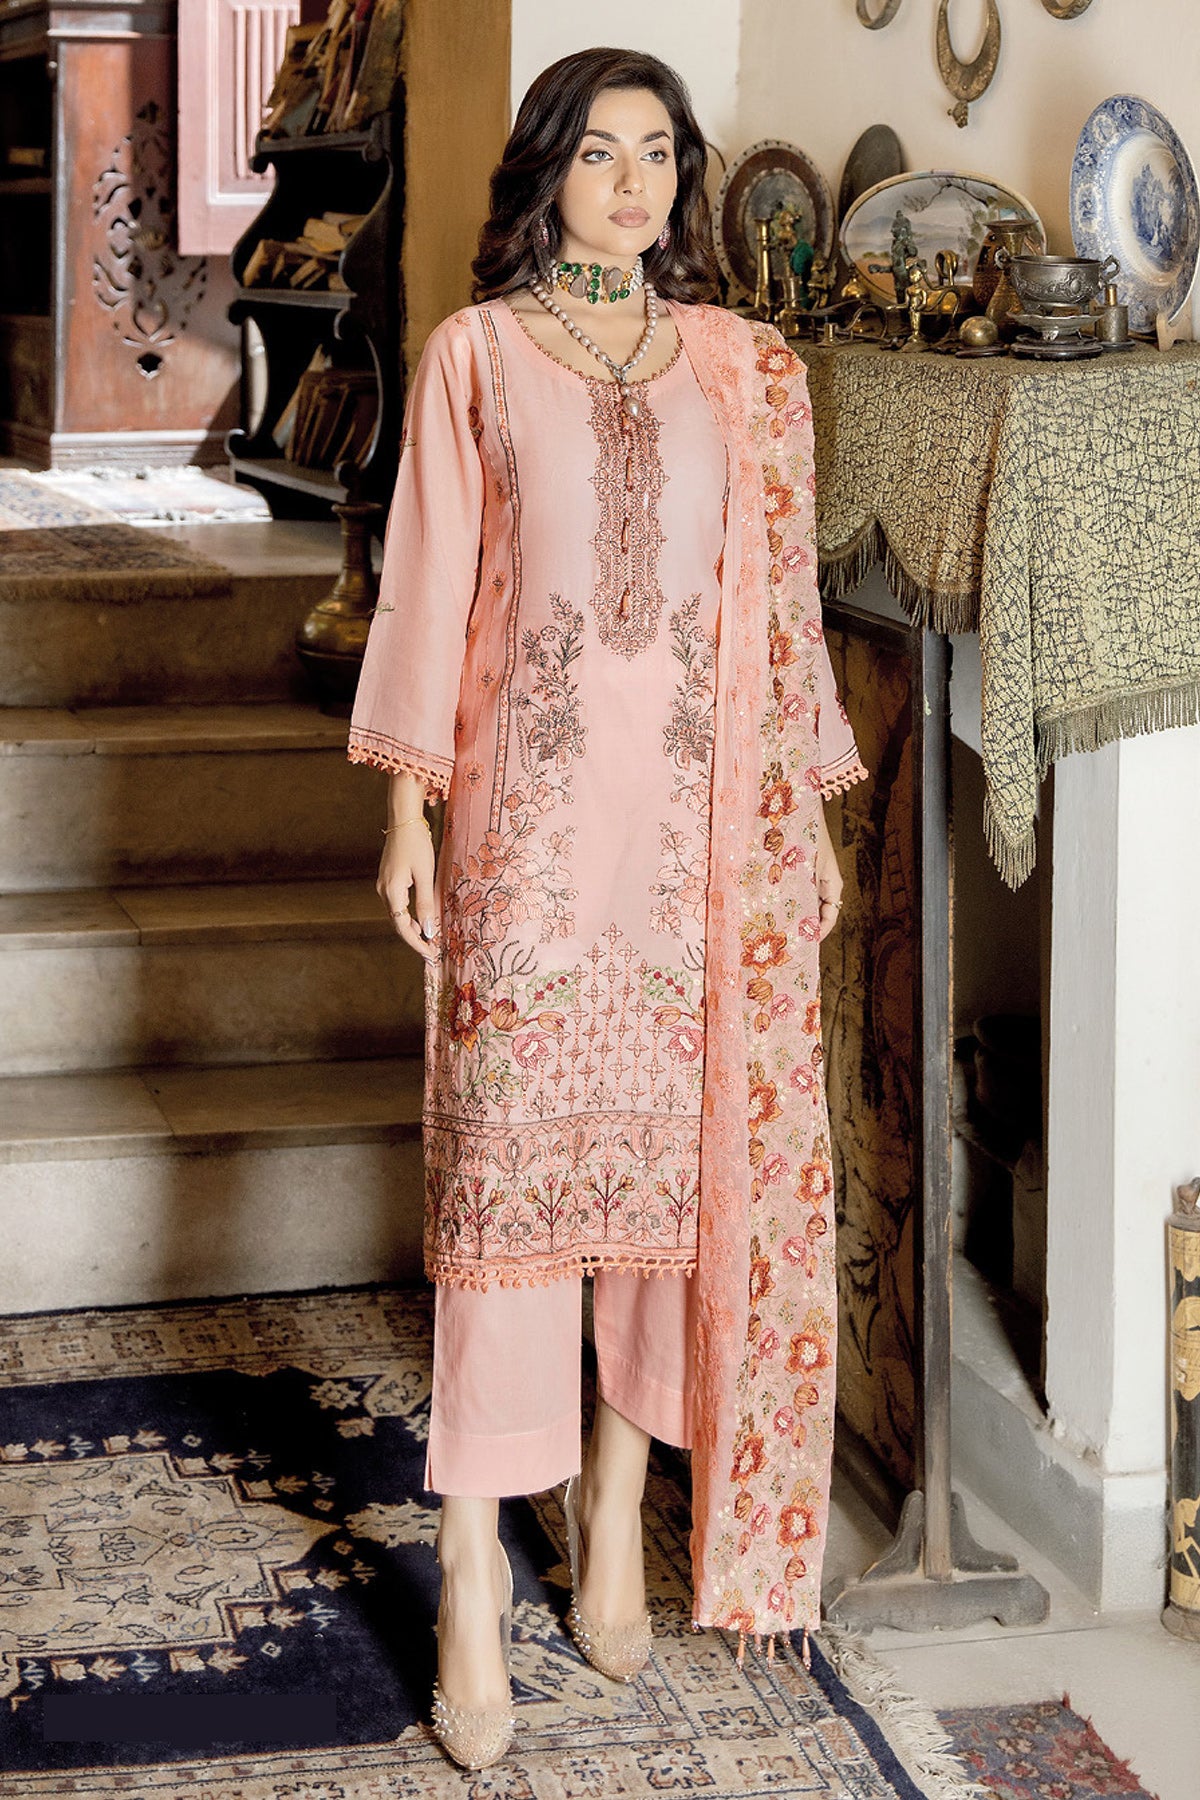 Buy Premium Lawn Cotton Designer Pakistani Style Suits With Neckline (Gala)  Embroidery. at Amazon.in